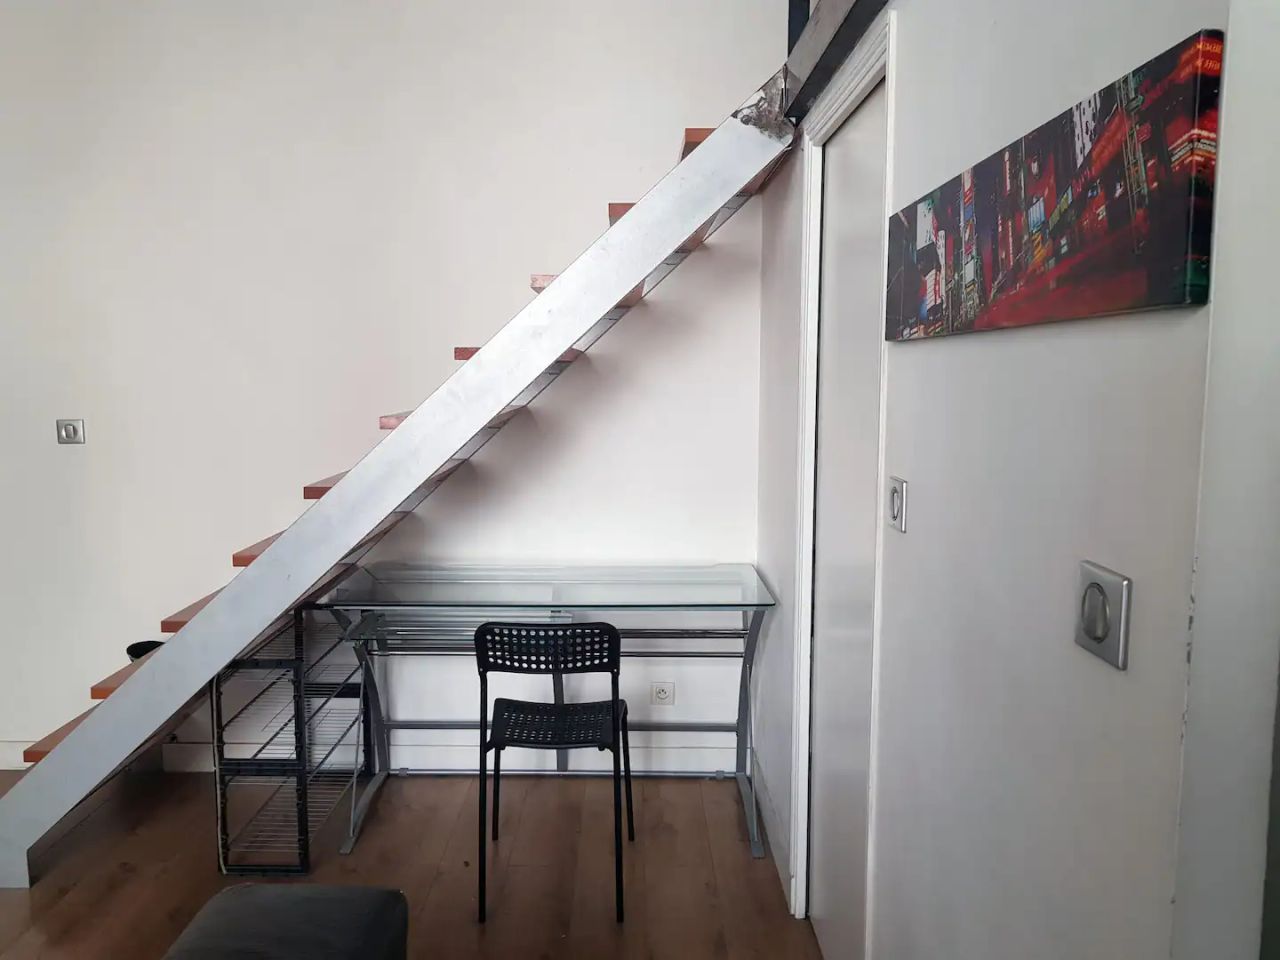 Cosy flat in the heart of LYON city centre